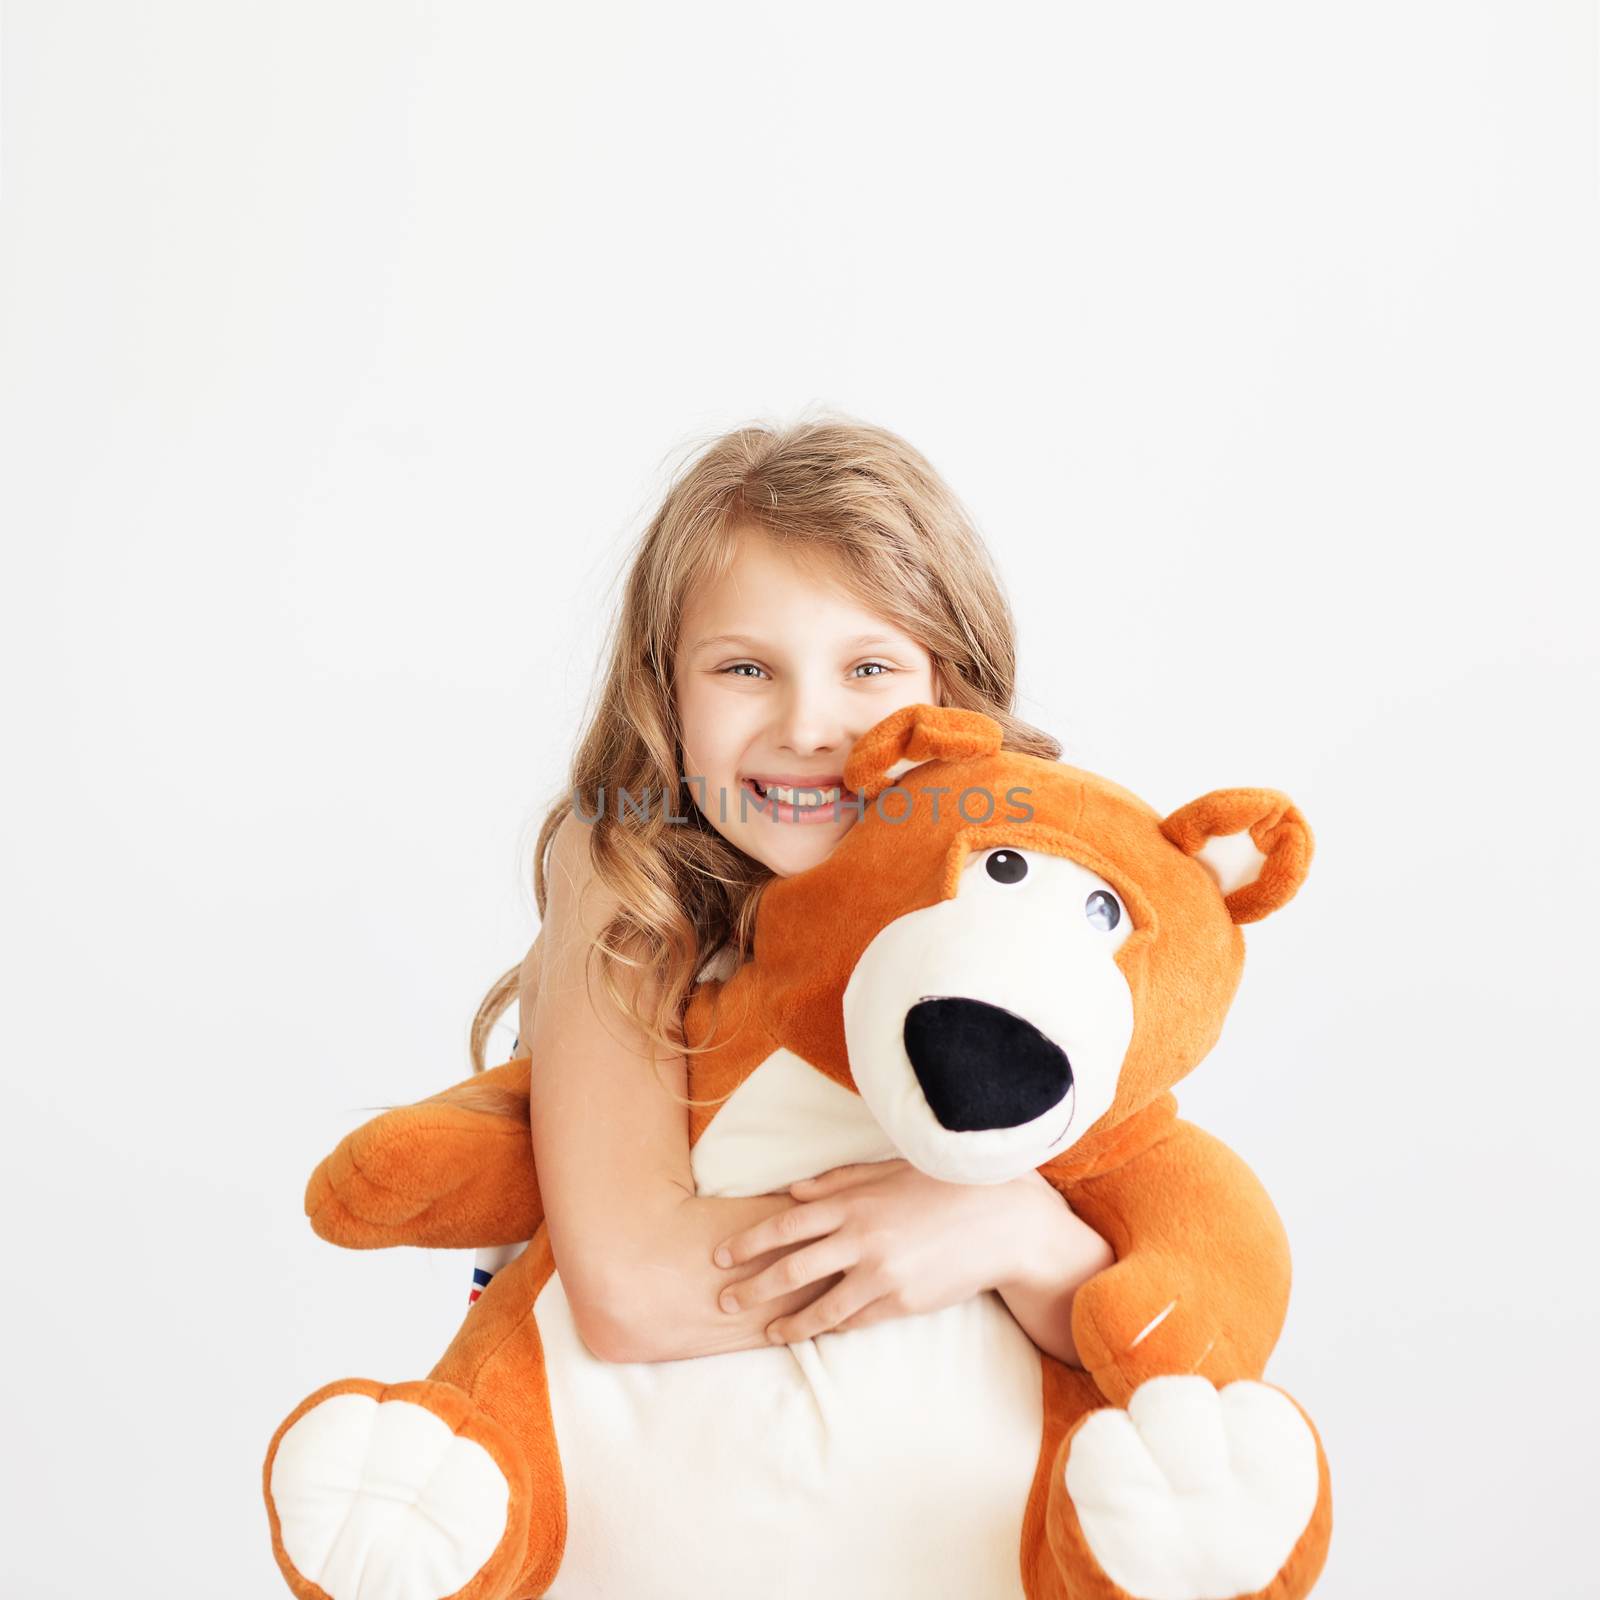 Little girl with big teddy bear having fun laughing Isolated on by natazhekova